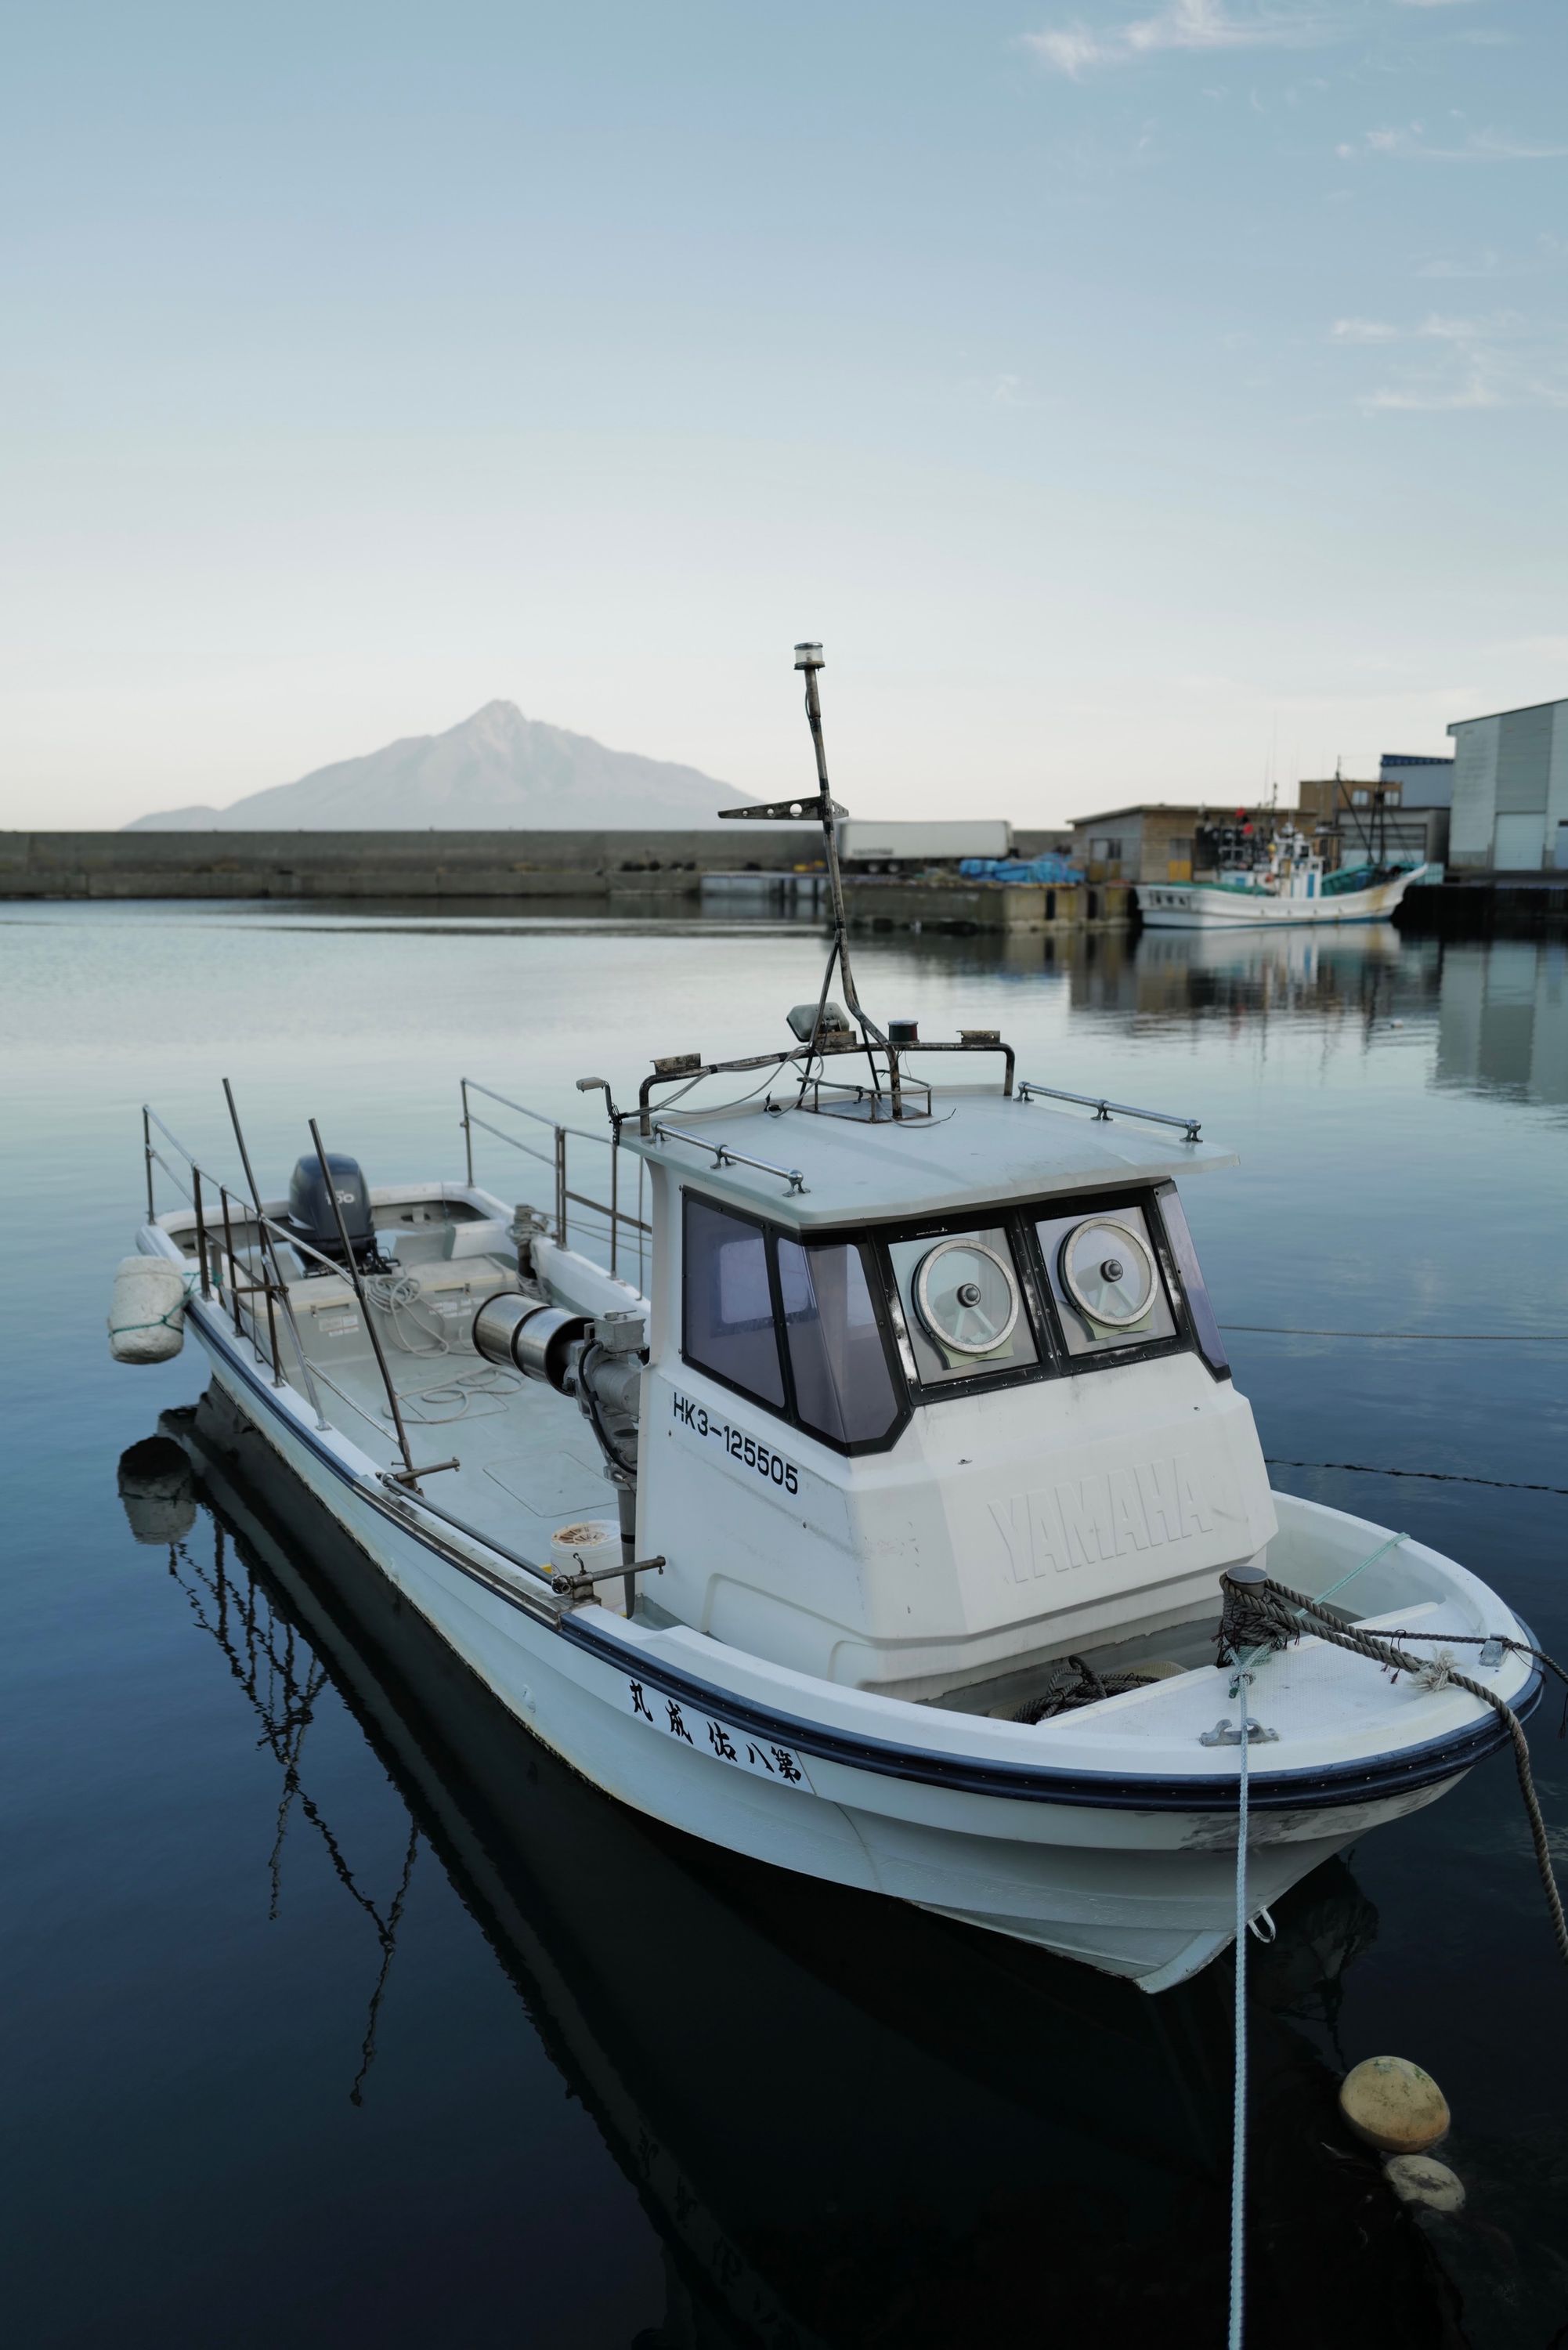 A small fishing boat in a harbor, with Mount Rishiri on the horizon behind it